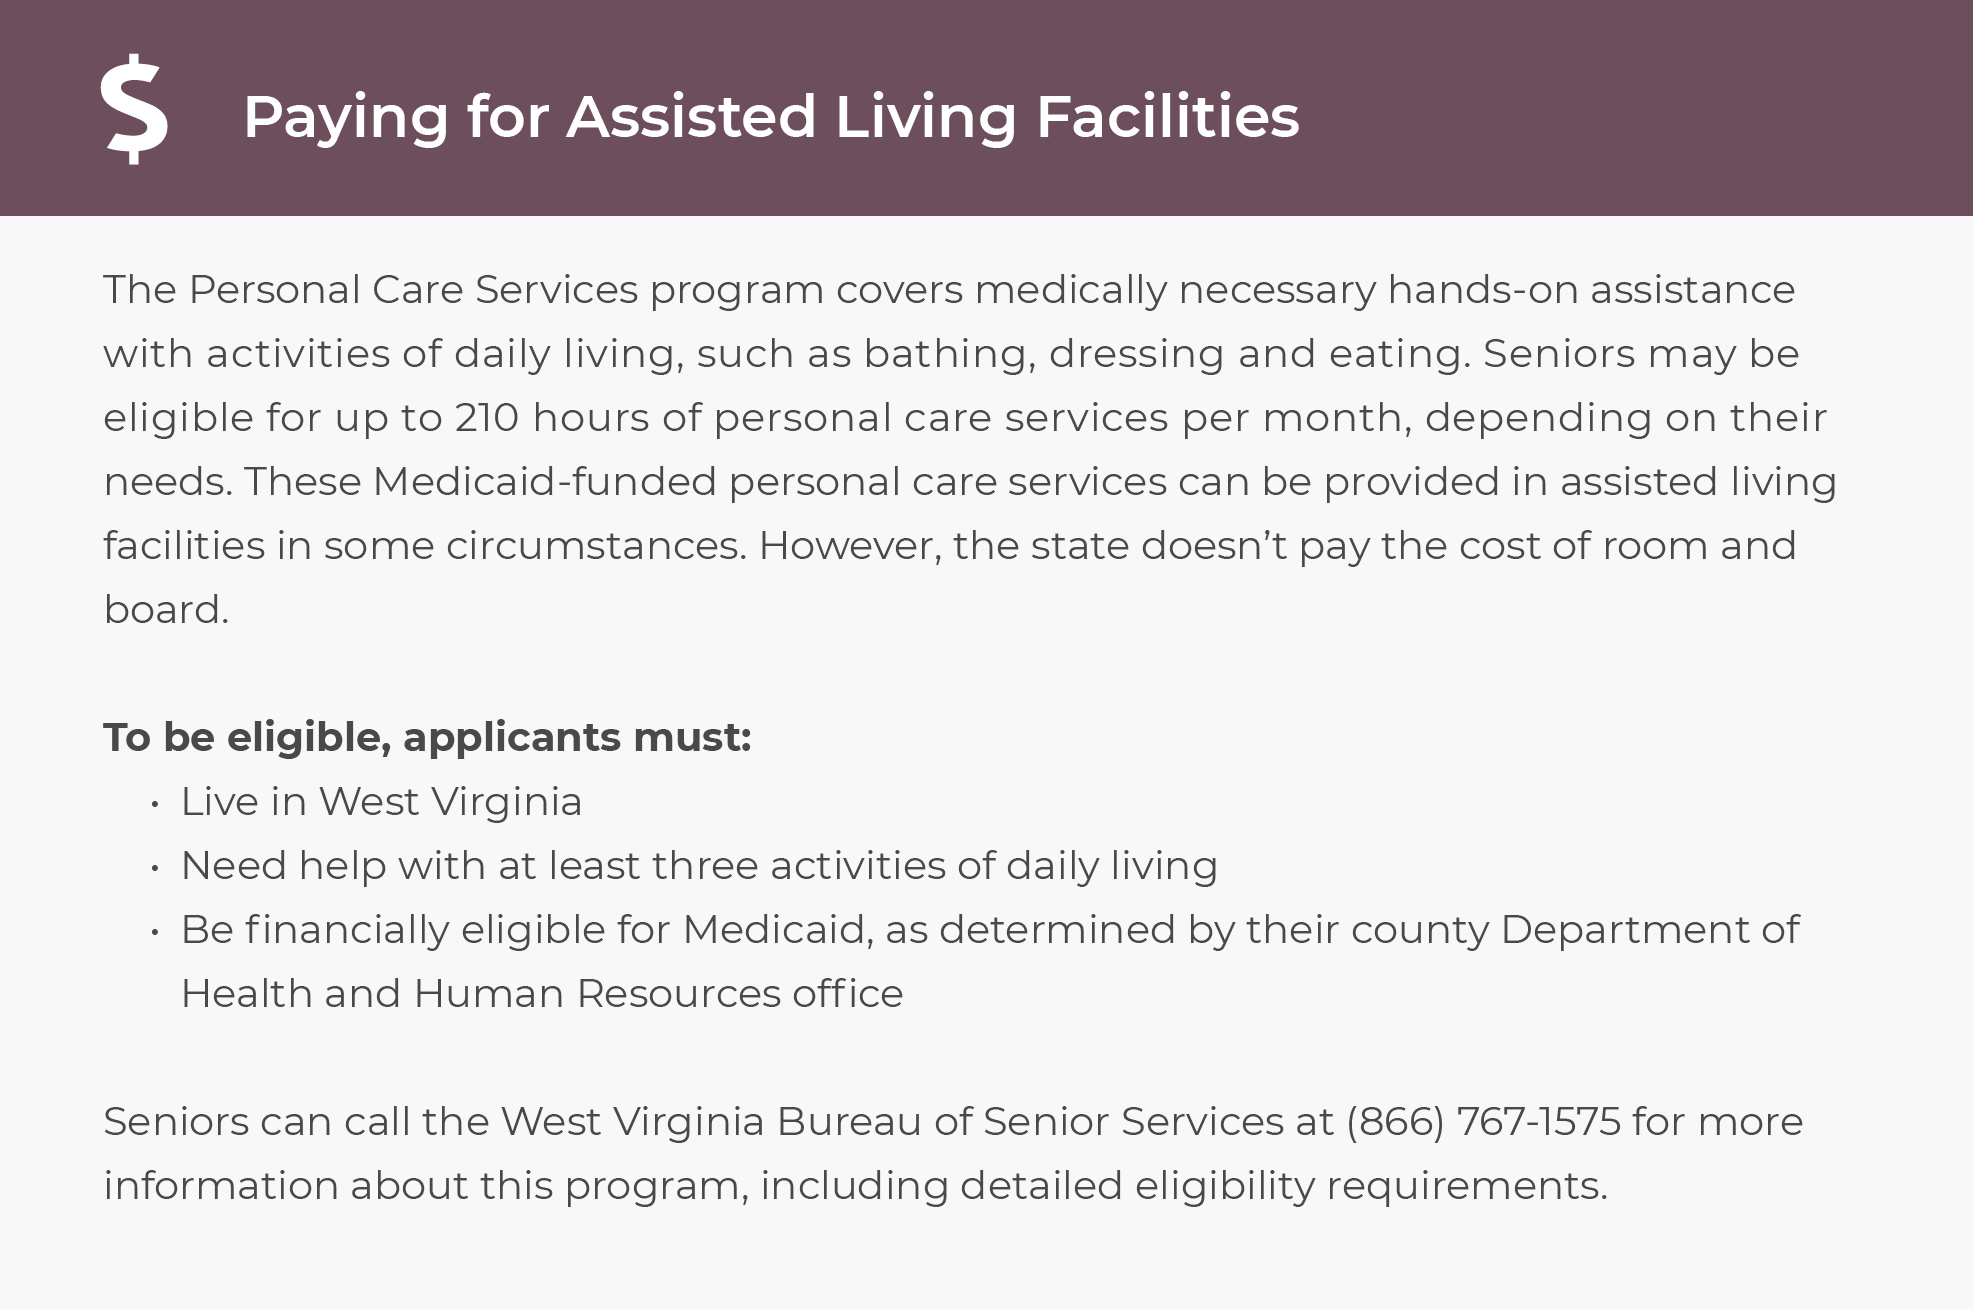 Paying for Assisted Living Facilities in West Virginia